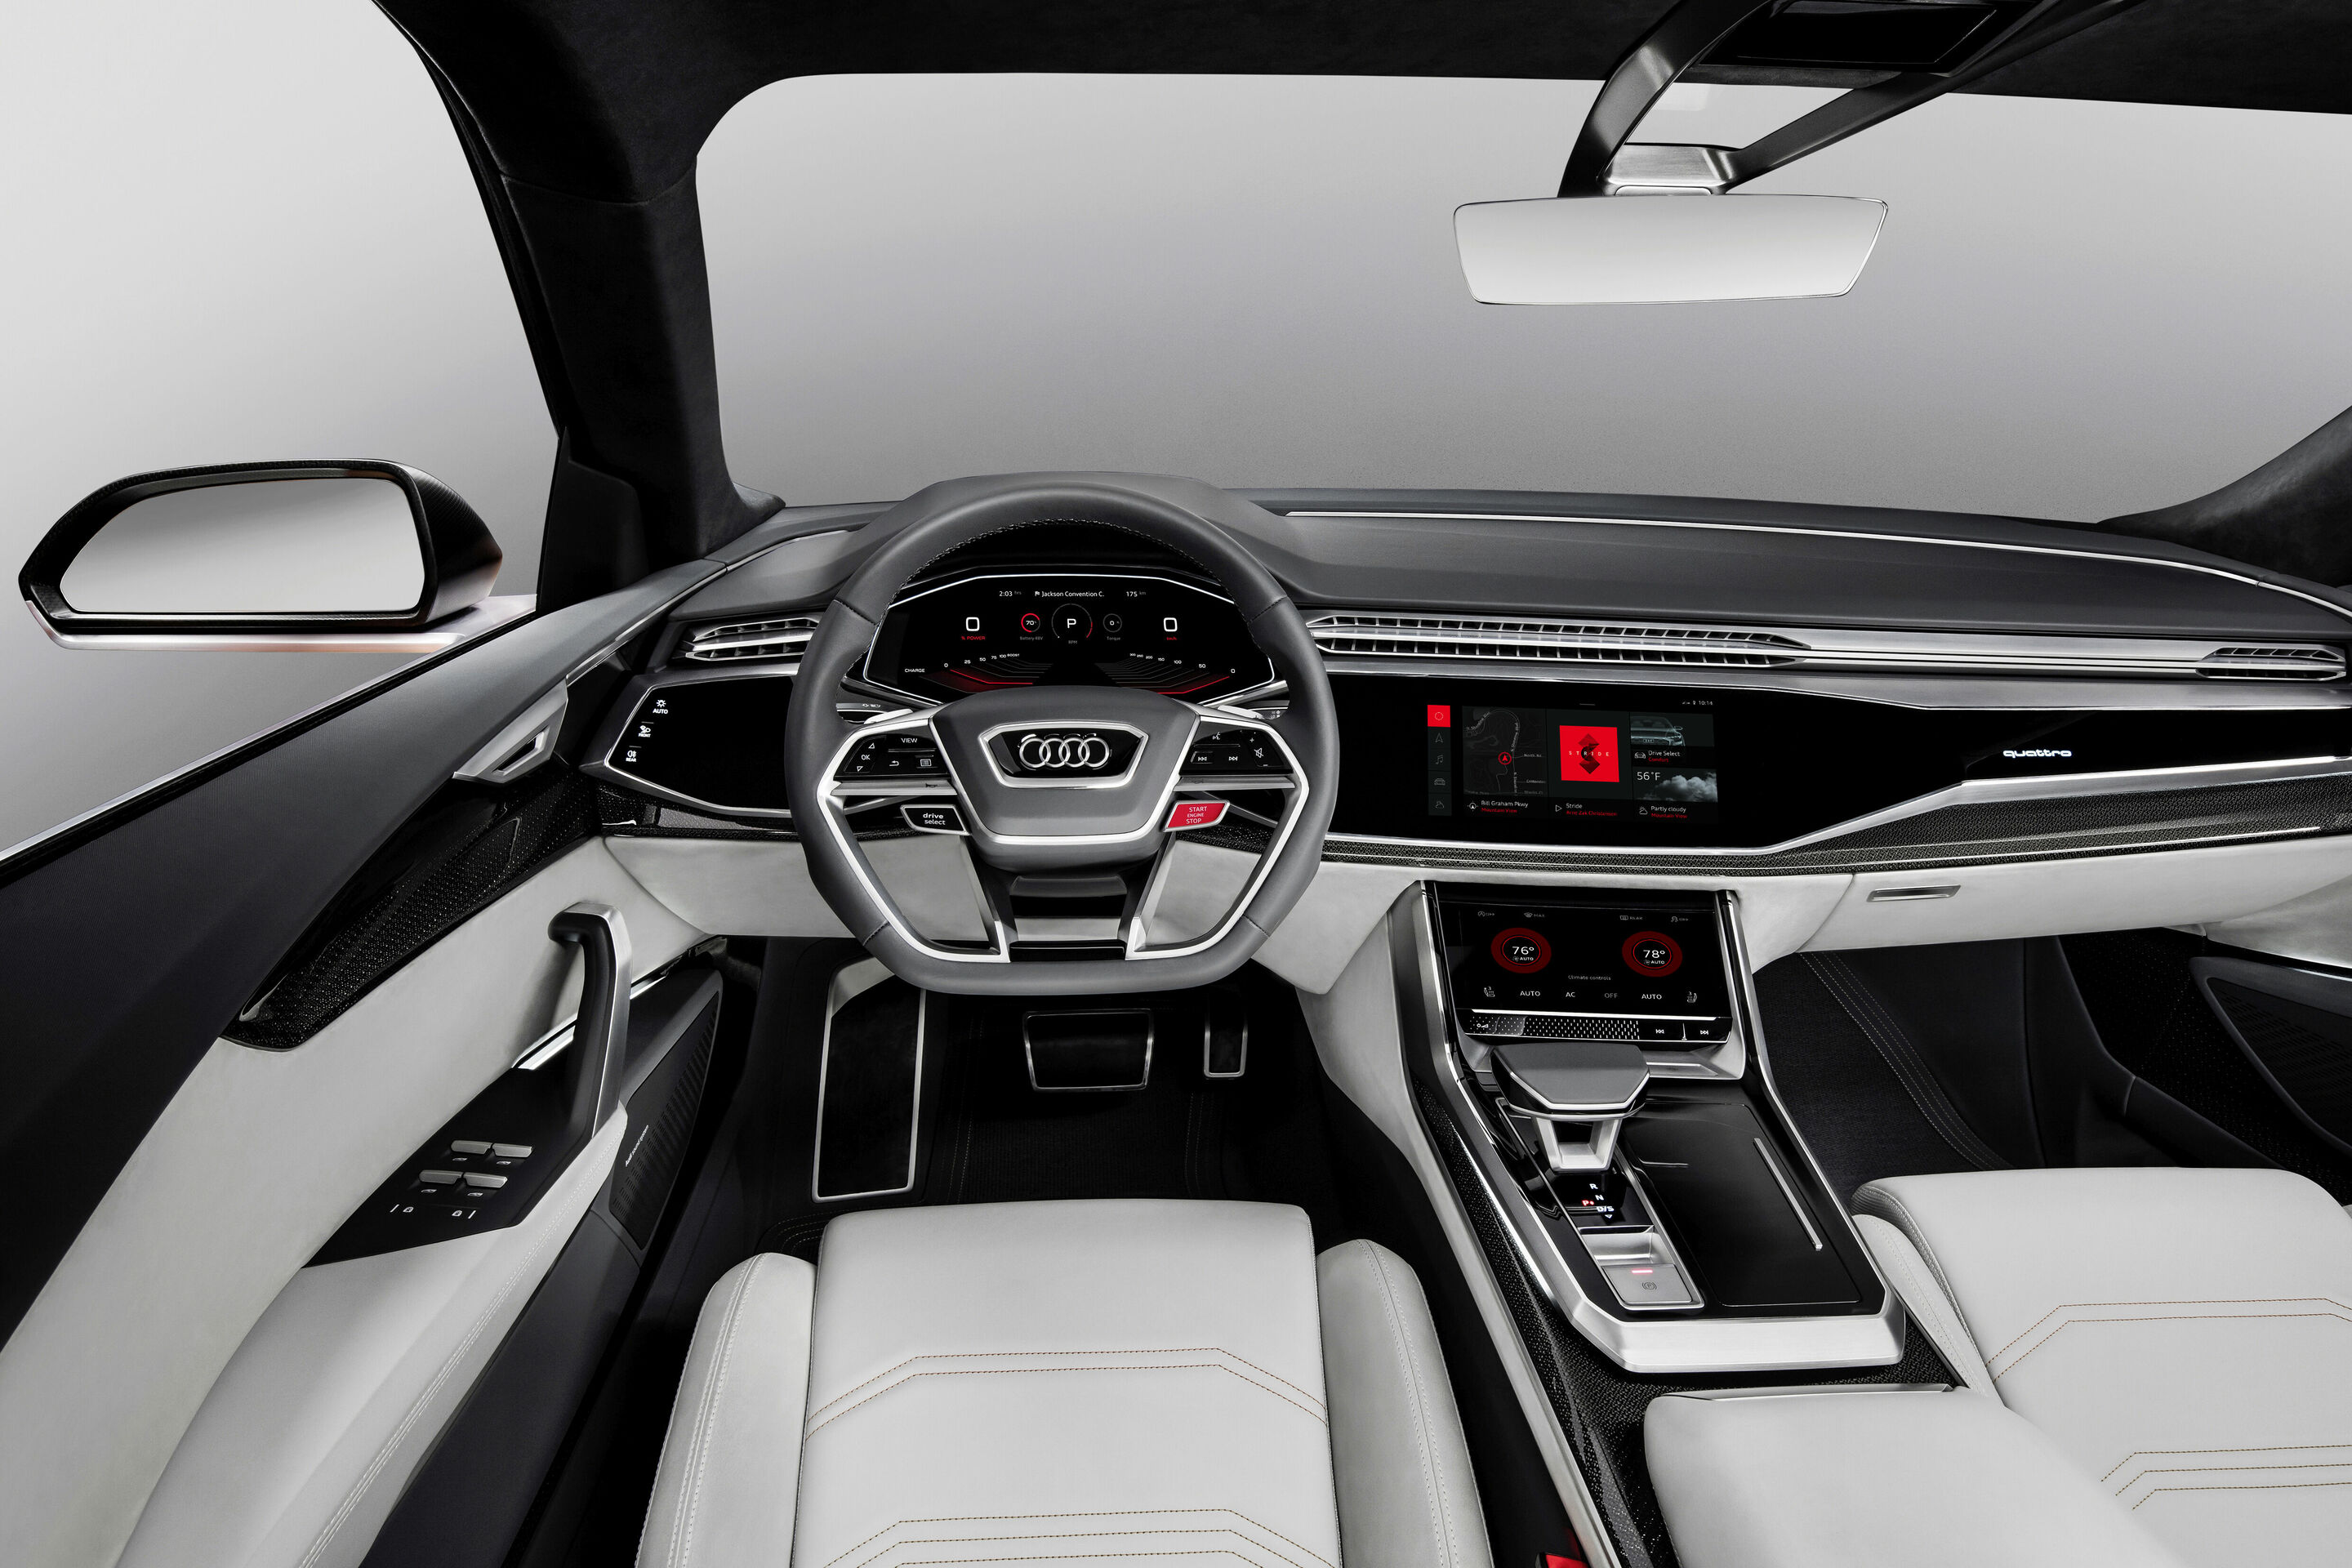 Audi shows integrated Android operating system in Audi Q8 sport